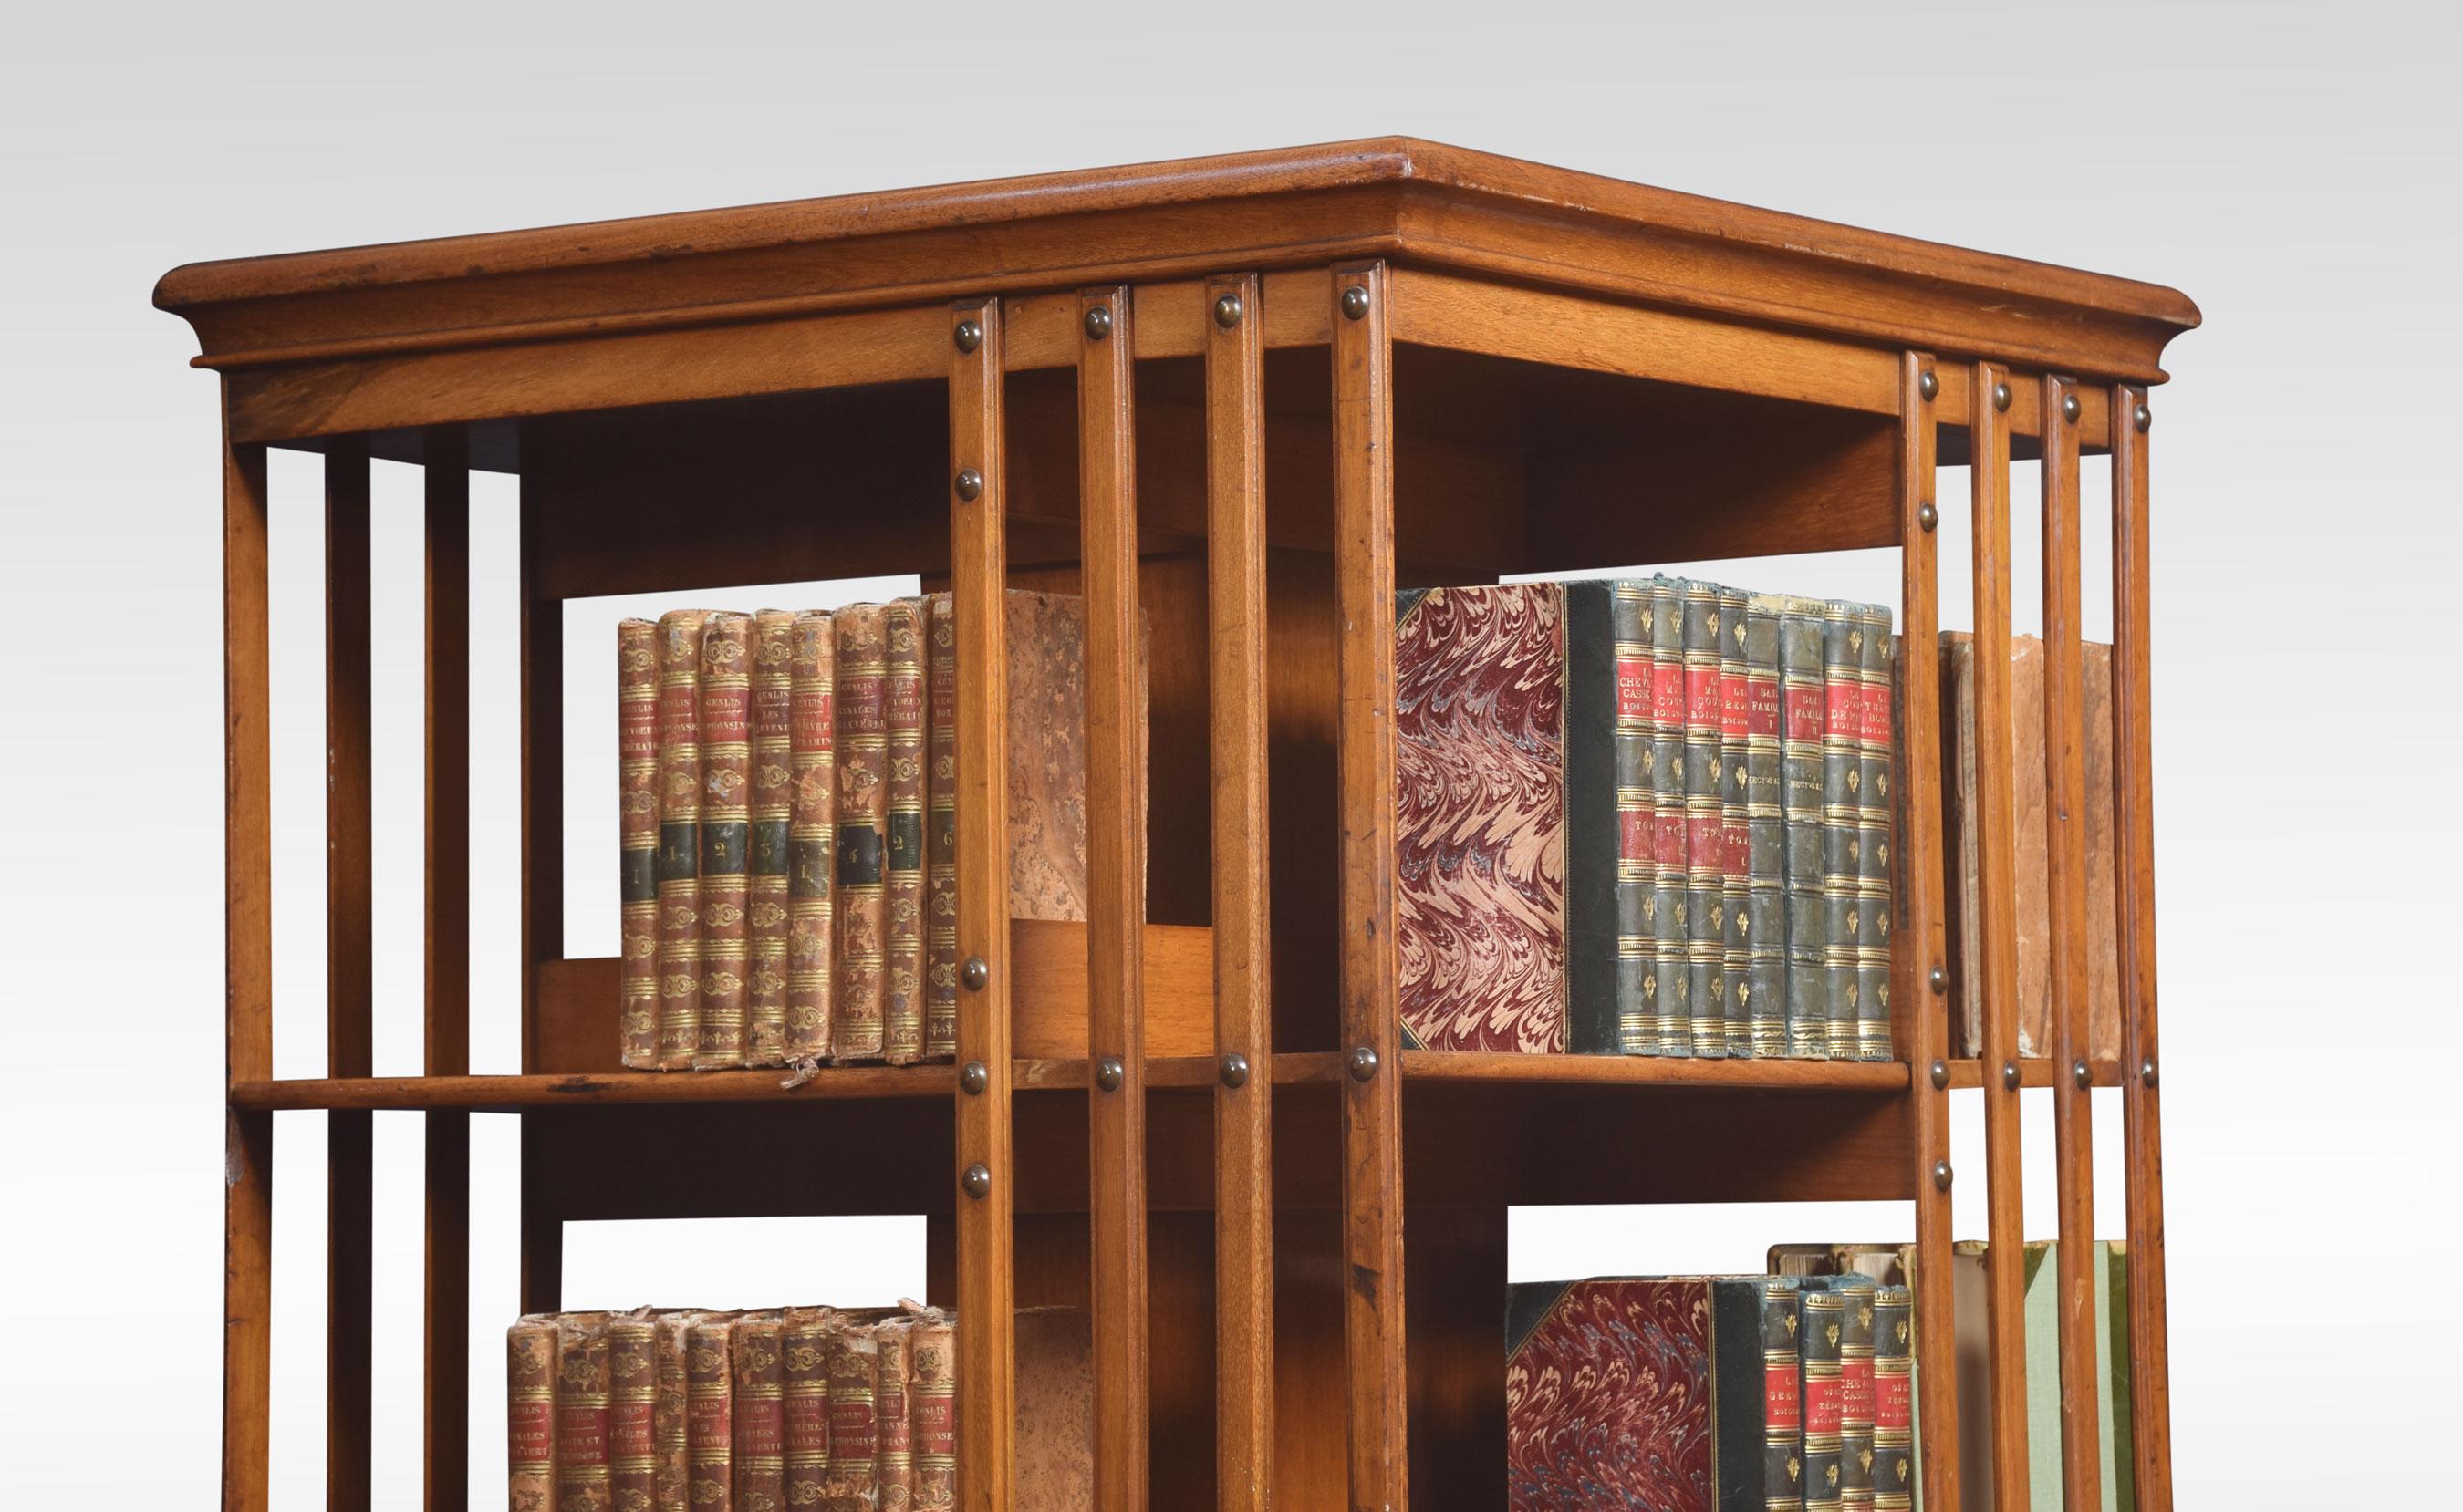 Walnut revolving bookcase the square top above an arrangement off shelves raised up on a cruciform metal base with castors by Maple & Co.
Dimensions
Height 47.5 inches
Width 24 inches
Depth 24 inches.